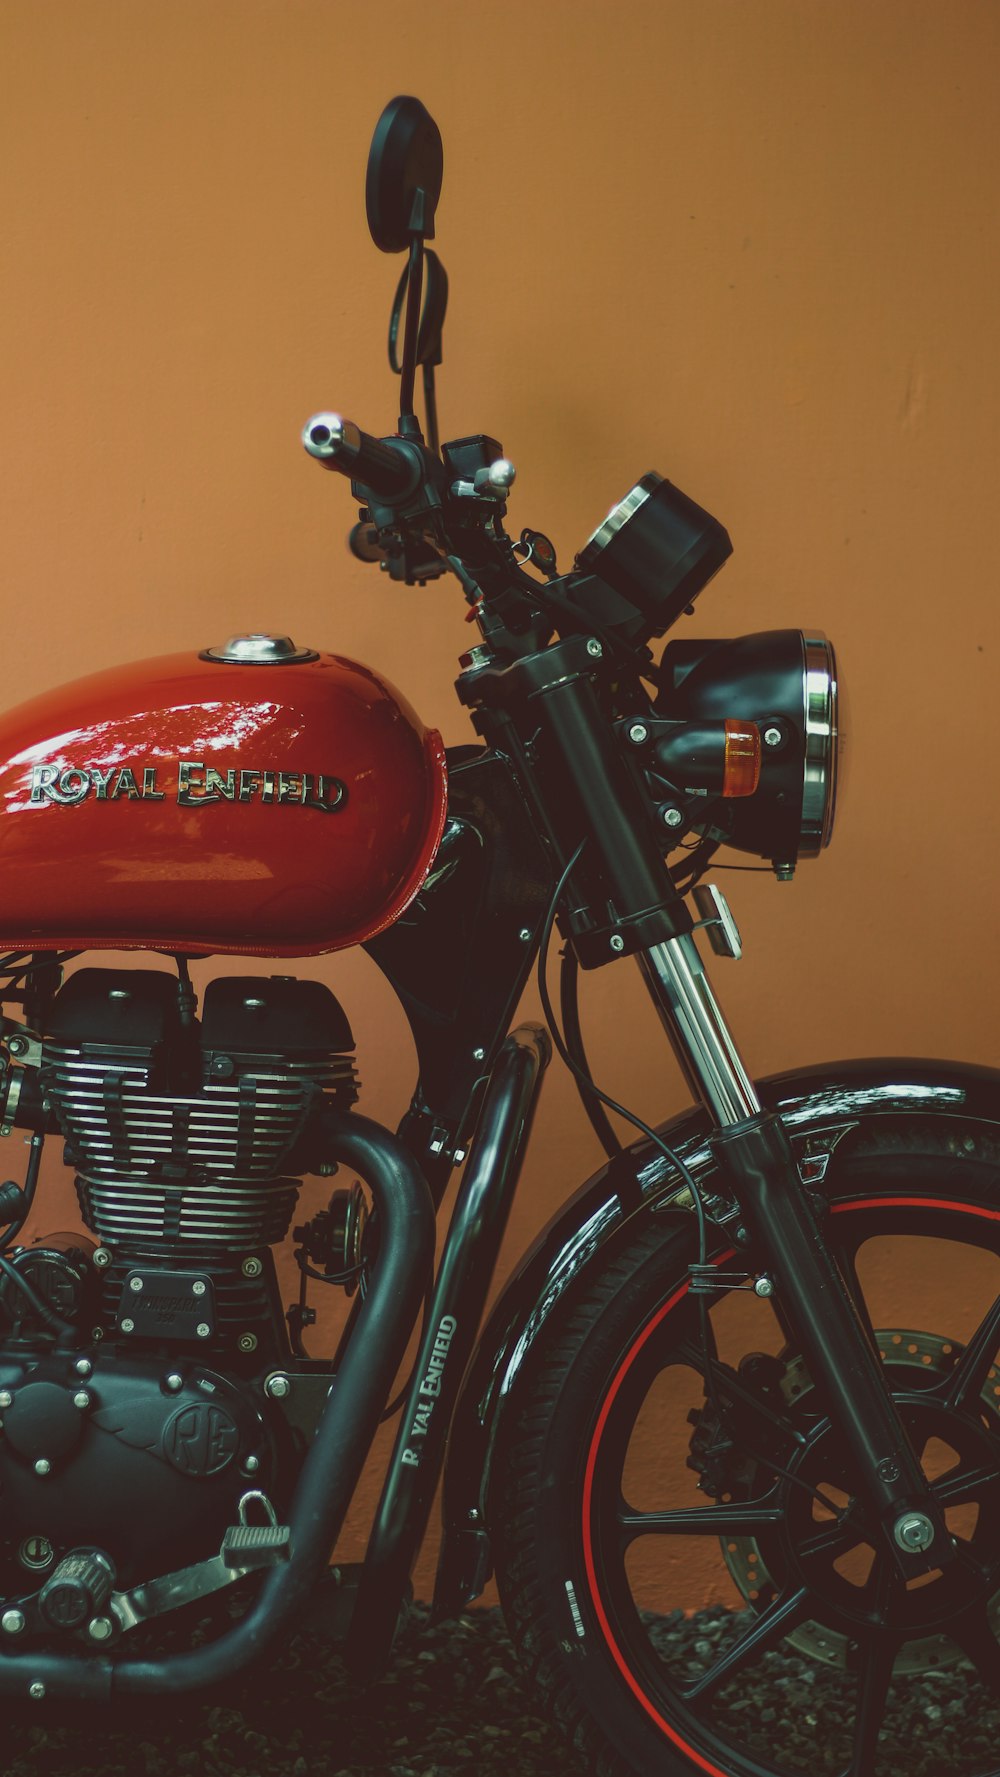 red and black cruiser motorcycle